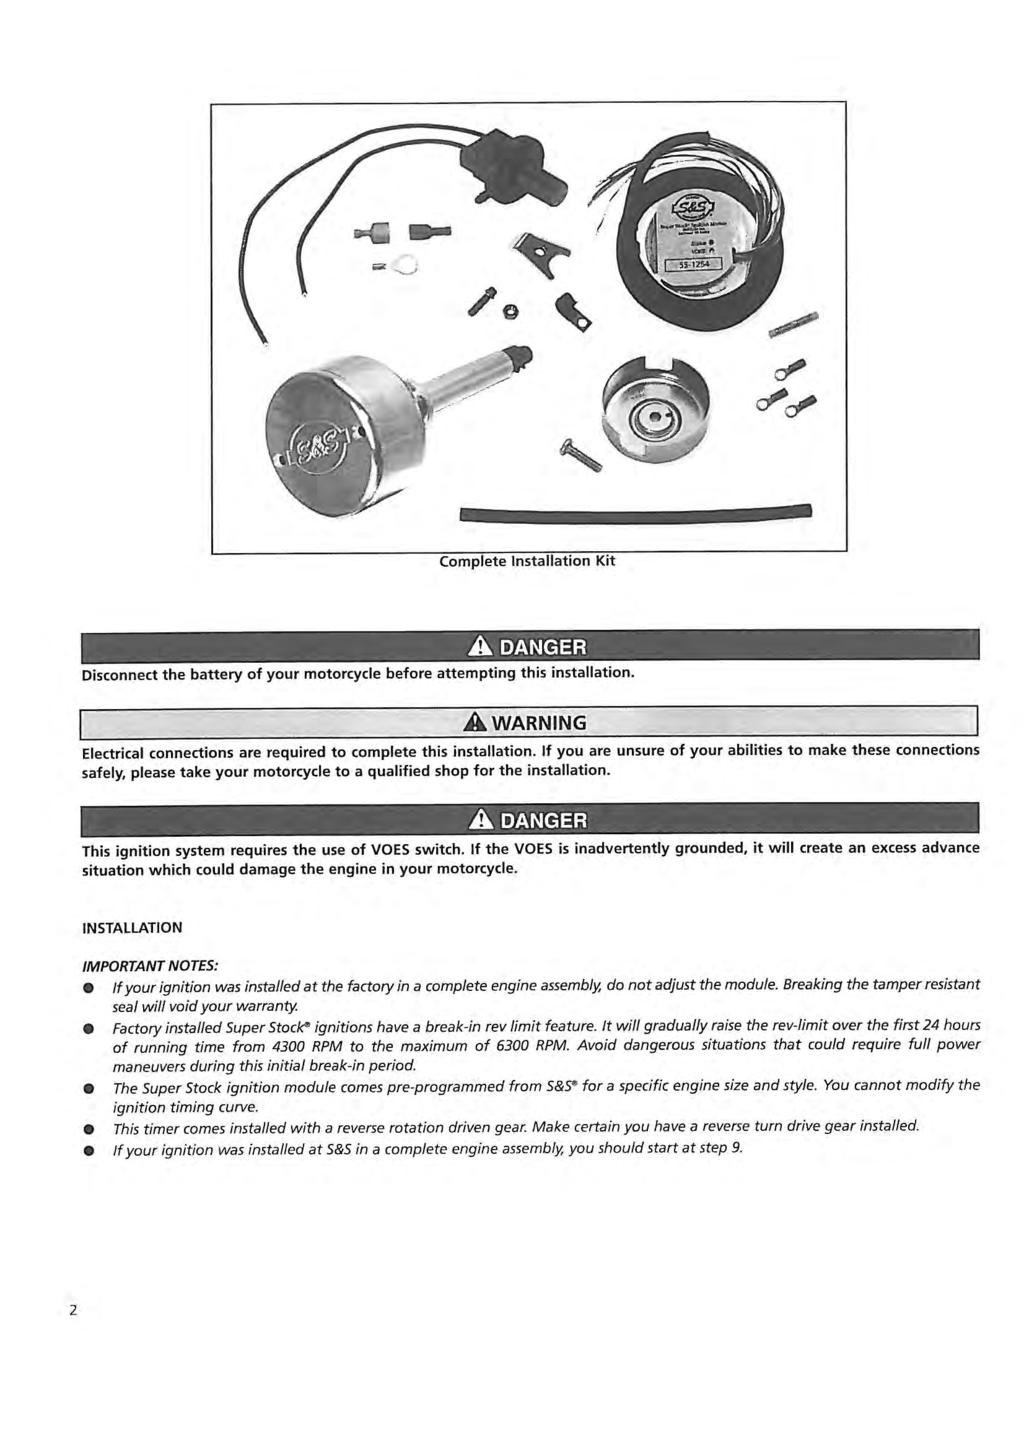 Complete Installation Kit A DANGER Disconnect the battery of your motorcycle before attempting this installation. A WARNING Electrical connections are required to complete this installation.